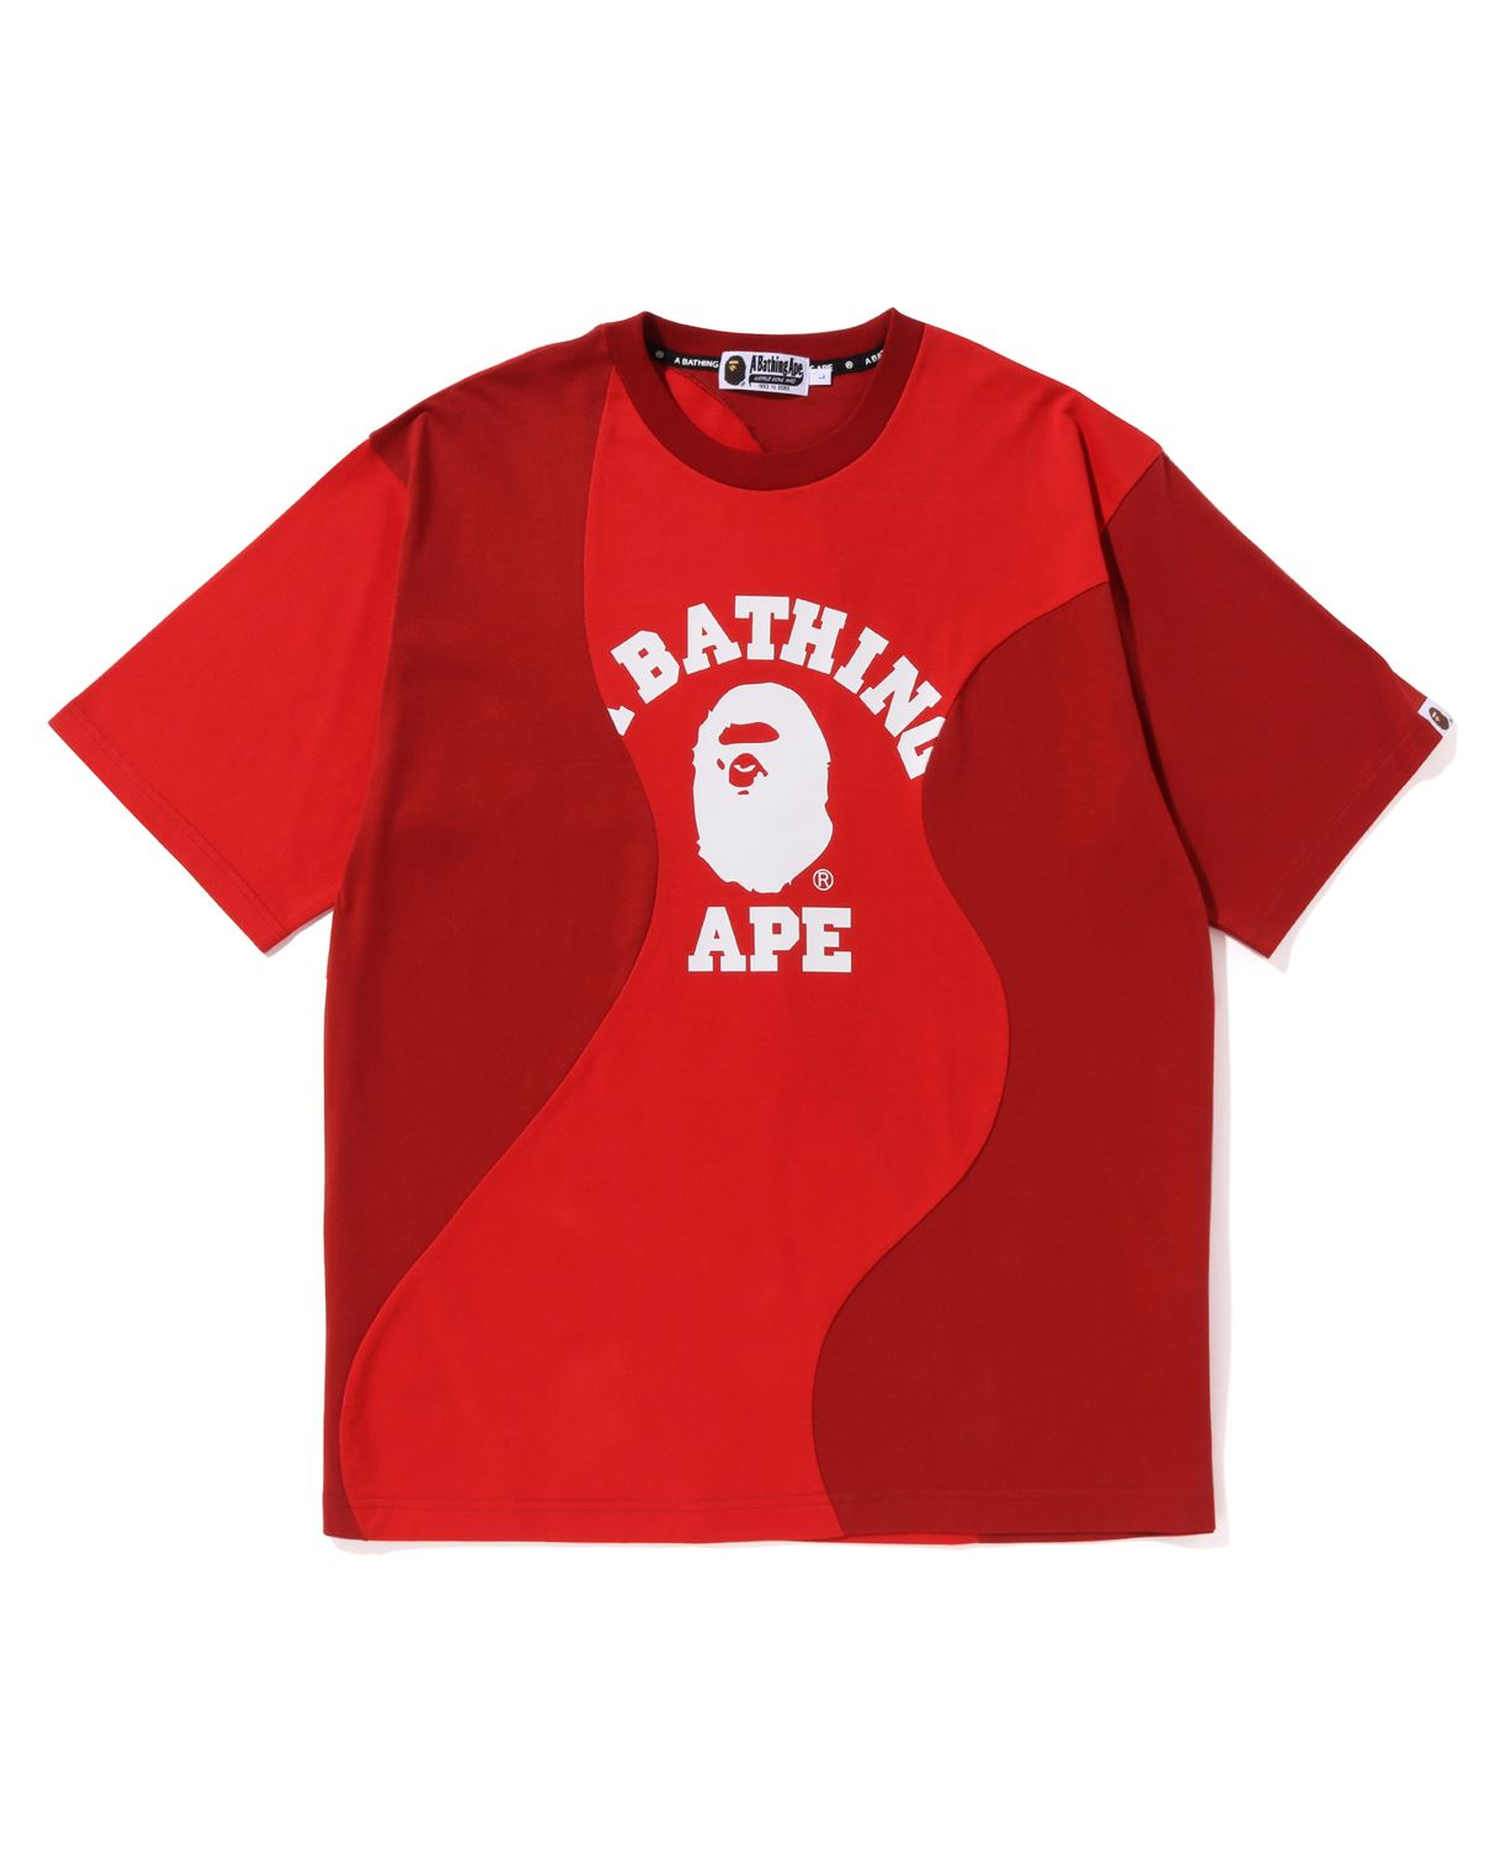 Shop Cutting College Relaxed Fit Tee Online | BAPE